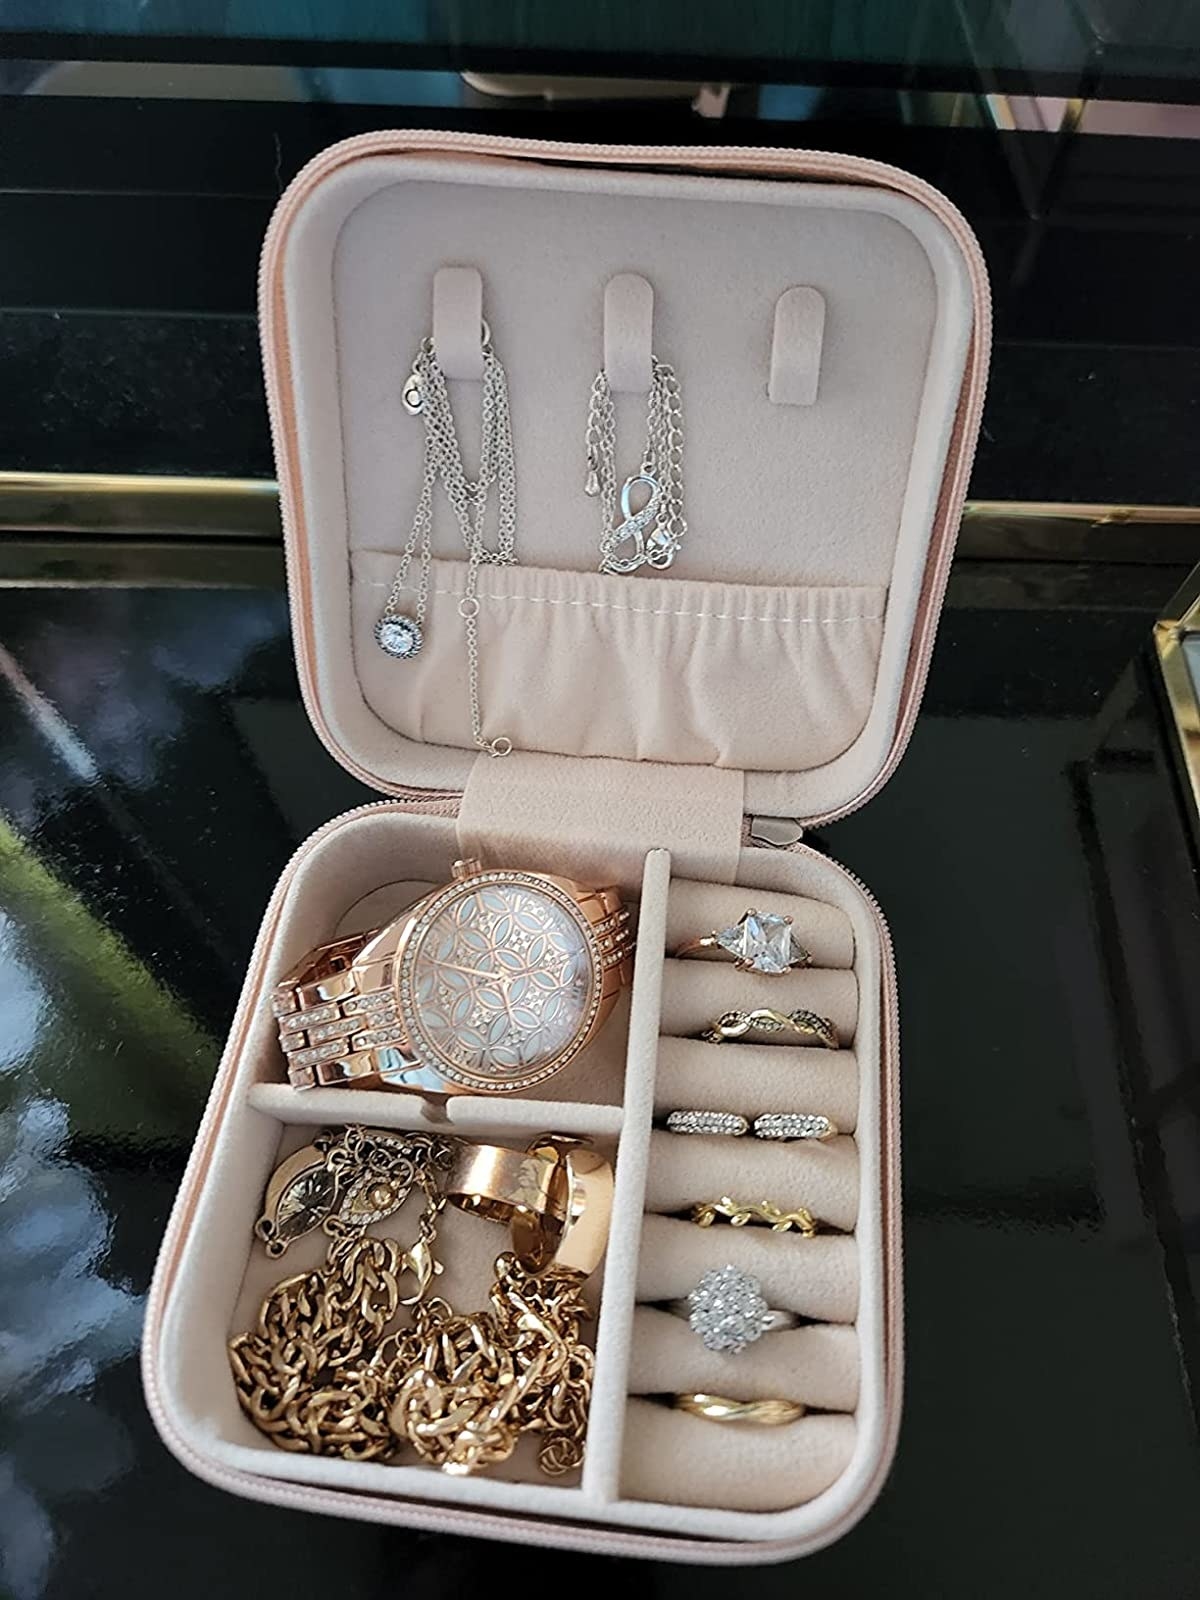 Reviewer image of jewelry case filled with rings, necklaces and a watch